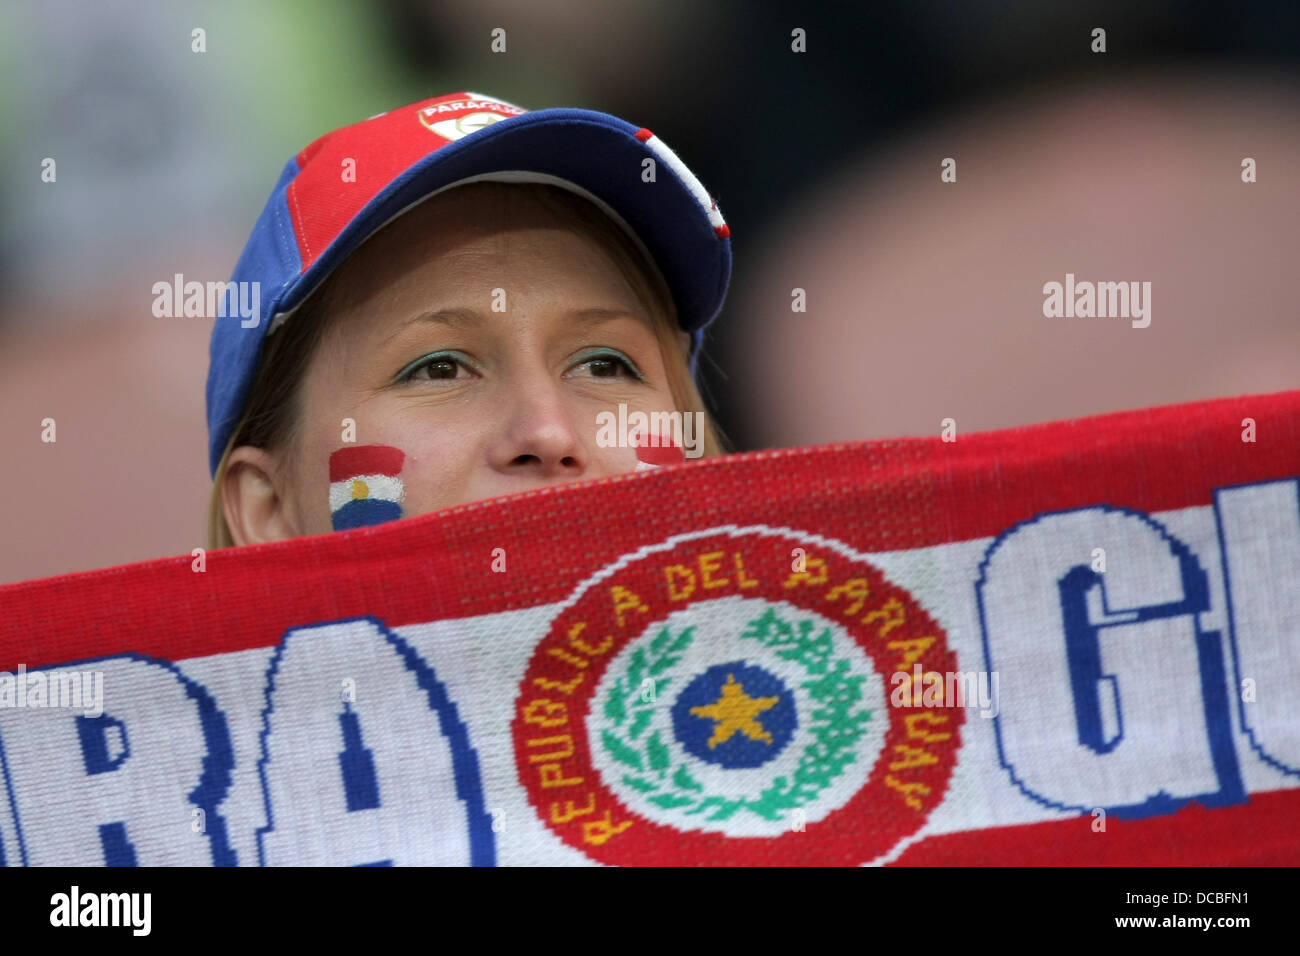 Kaiserslautern, Germany. 14th Aug, 2013. A fan of Paraguay is seen before the international friendly soccer match Germany vs Paraguay at the Fritz-Walter-Stadium in Kaiserslautern, Germany, 14 August 2013. Photo: Fredrik von Erichsen/dpa/Alamy Live News © dpa picture alliance/Alamy Live News Stock Photo